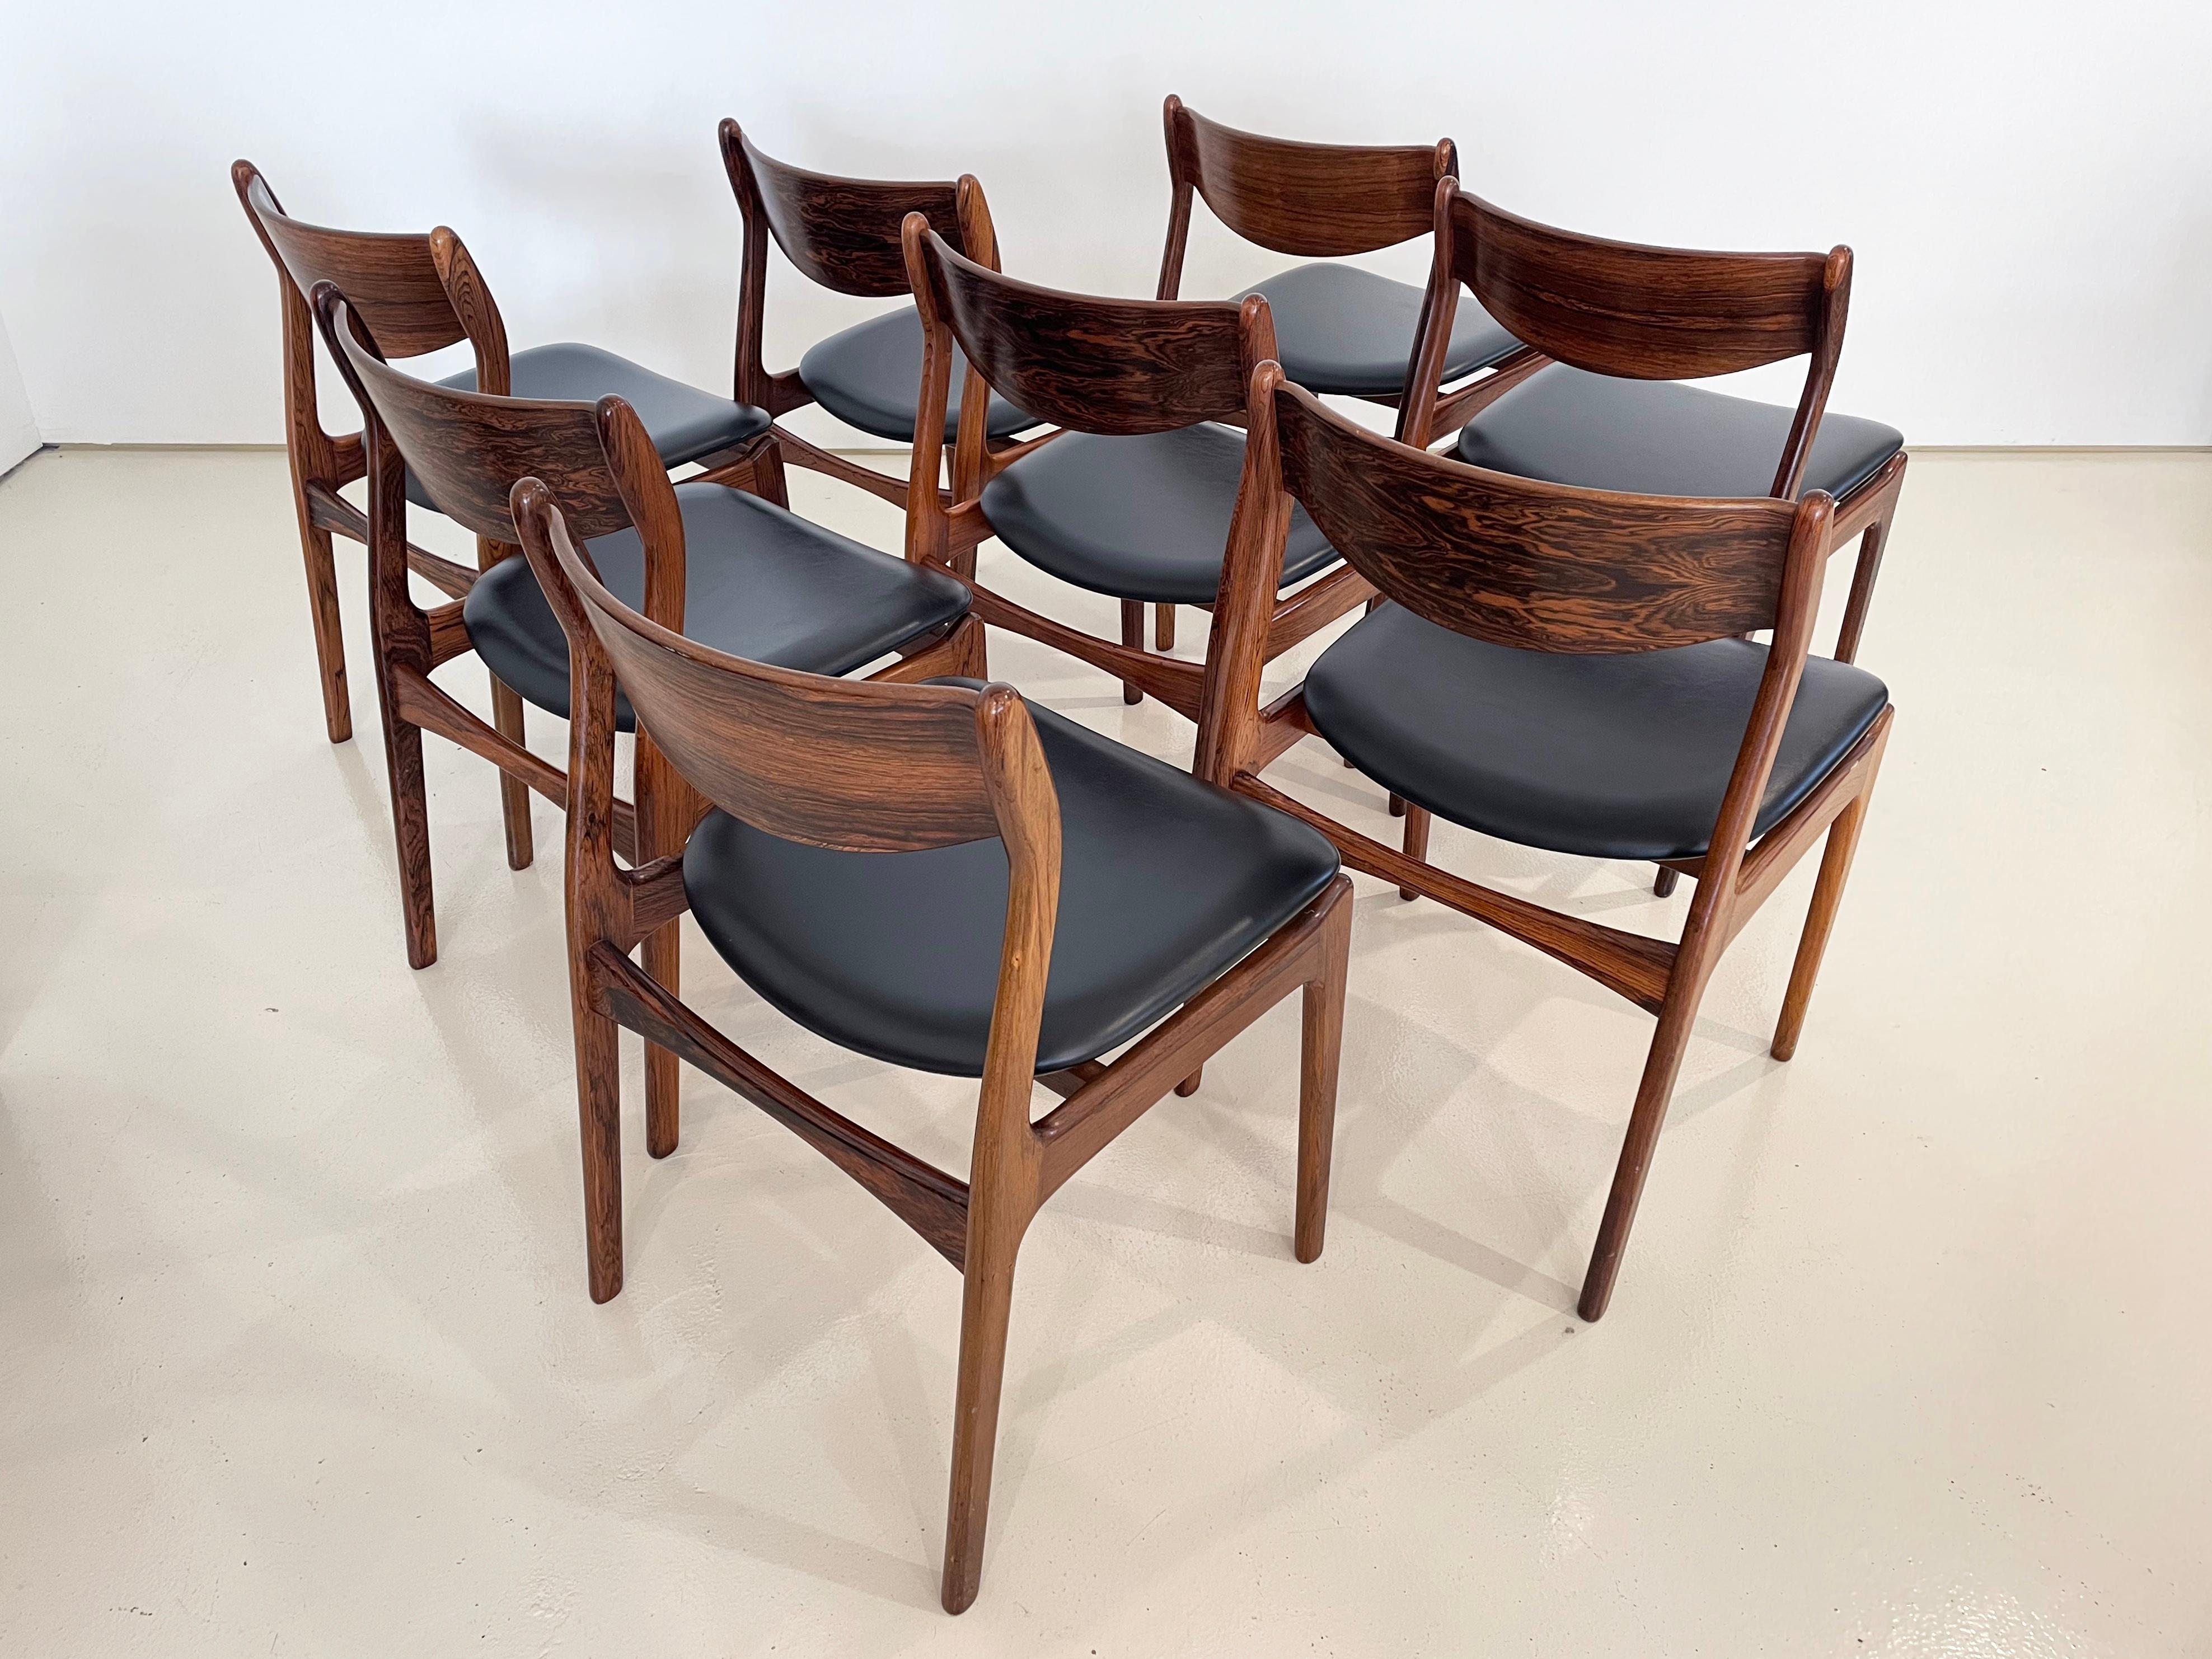 20th Century Vintage Mid-century Danish Dining Chairs, Designed by P.E. Jorgensen, Set of 8 For Sale